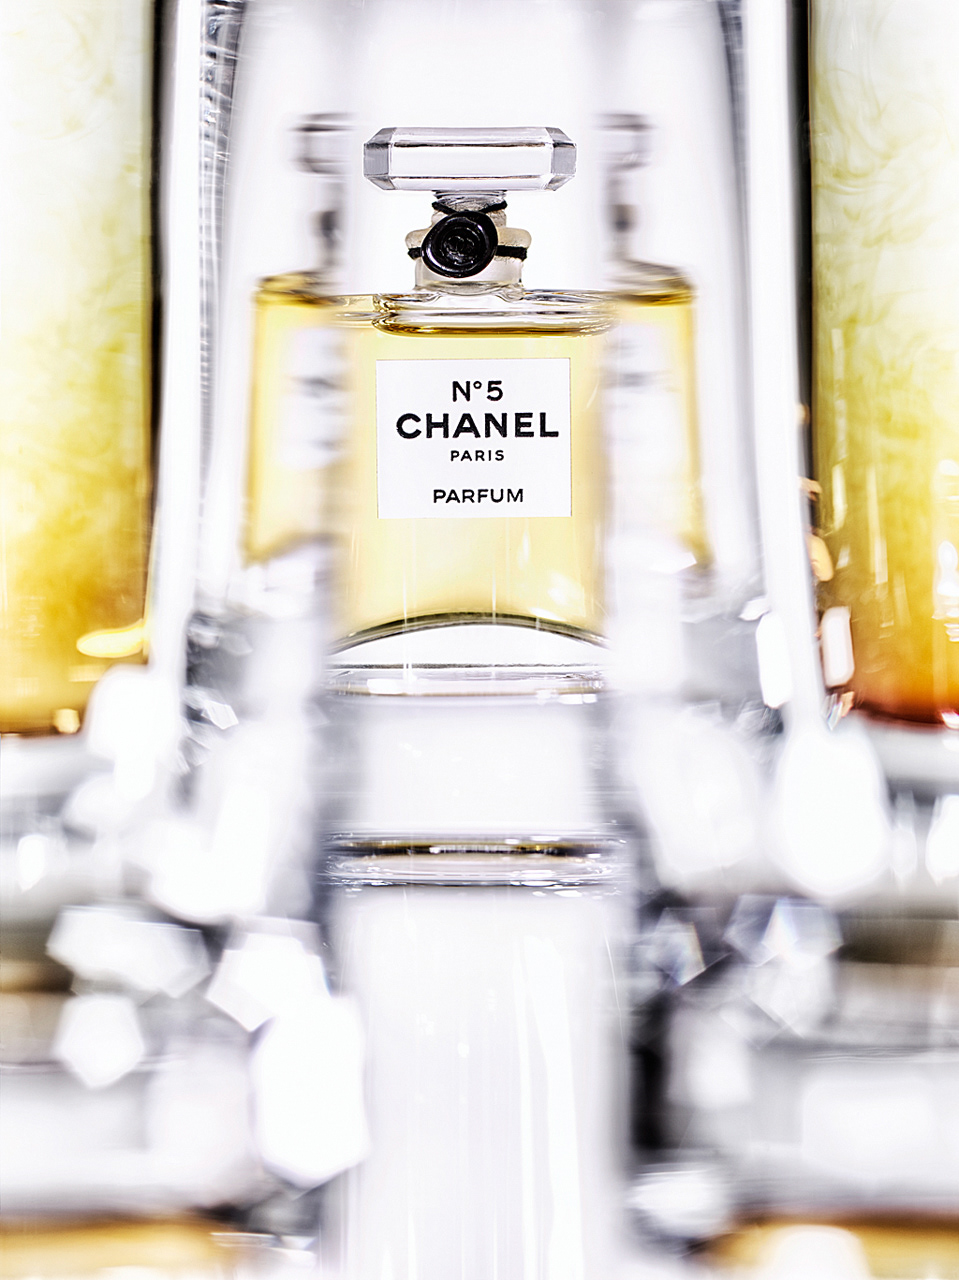 Bumble Bee chanel cosmetics Fragrance jello parfum Photography  Product Photography Sabine Scheer still life